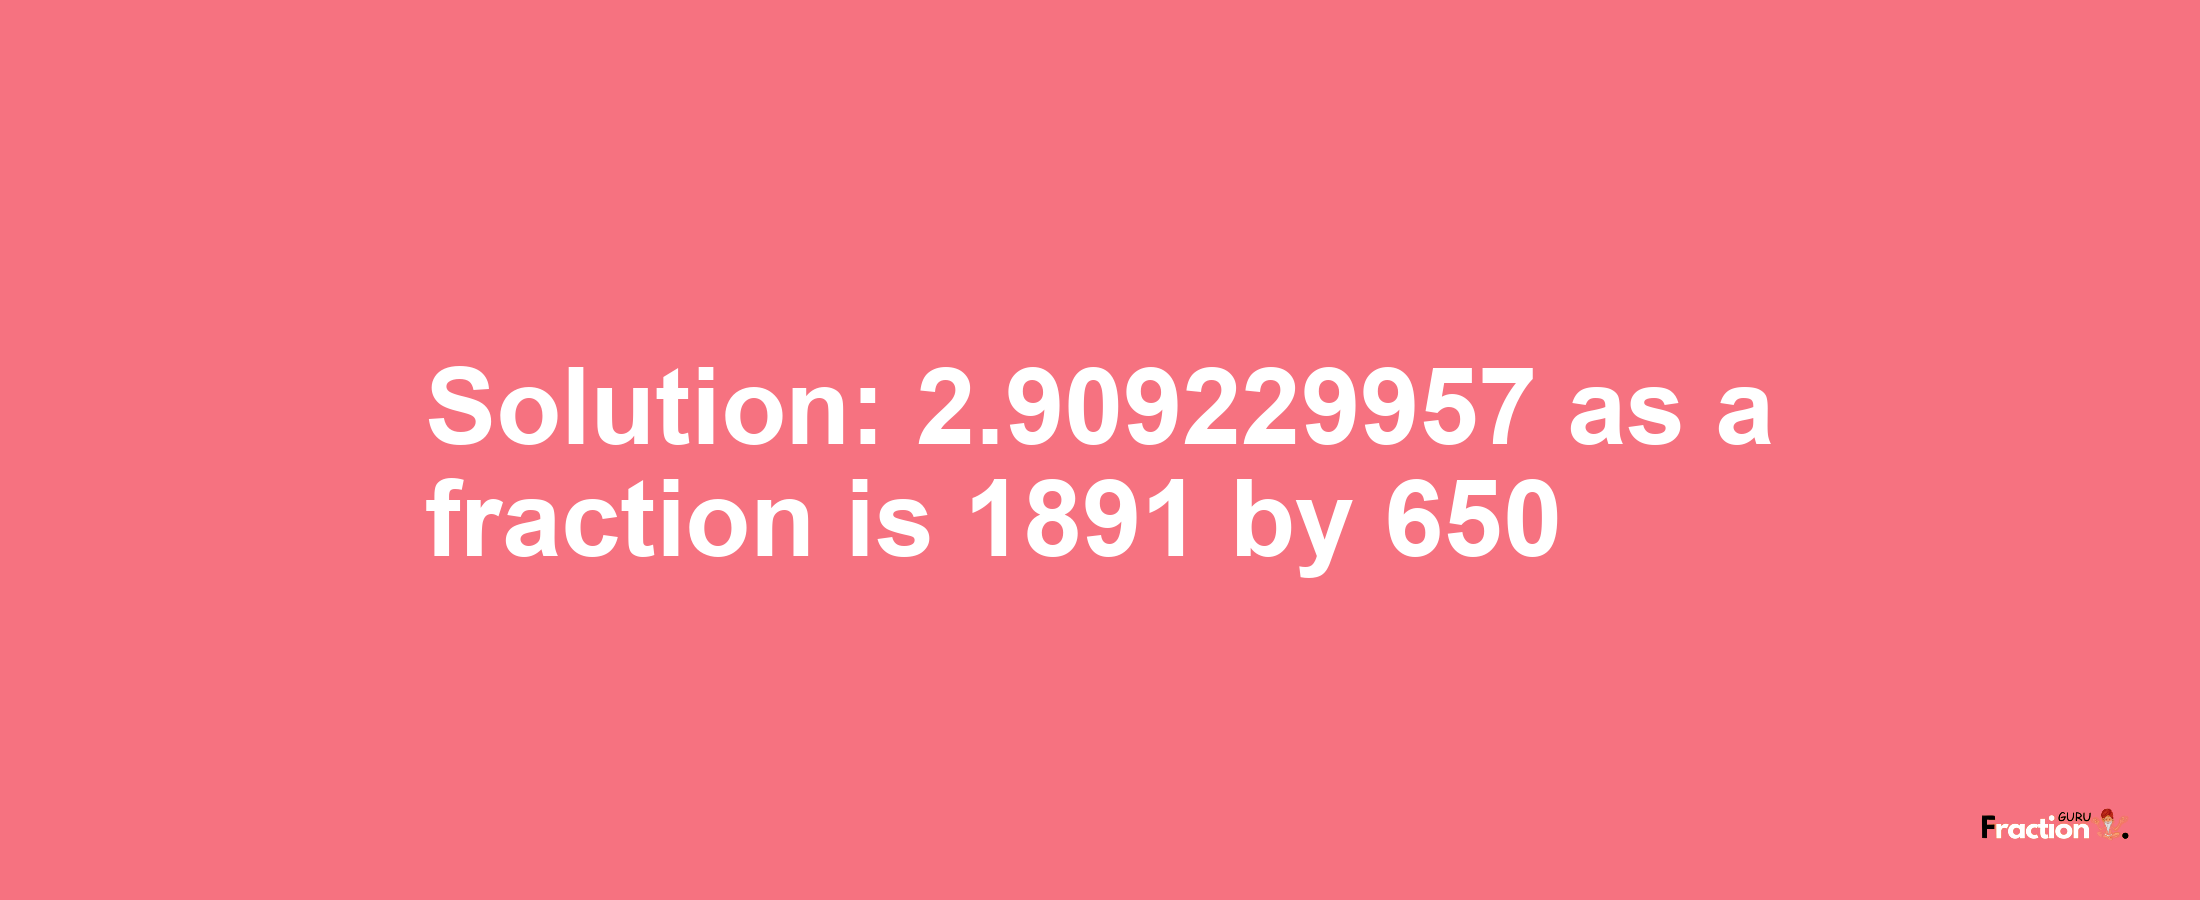 Solution:2.909229957 as a fraction is 1891/650